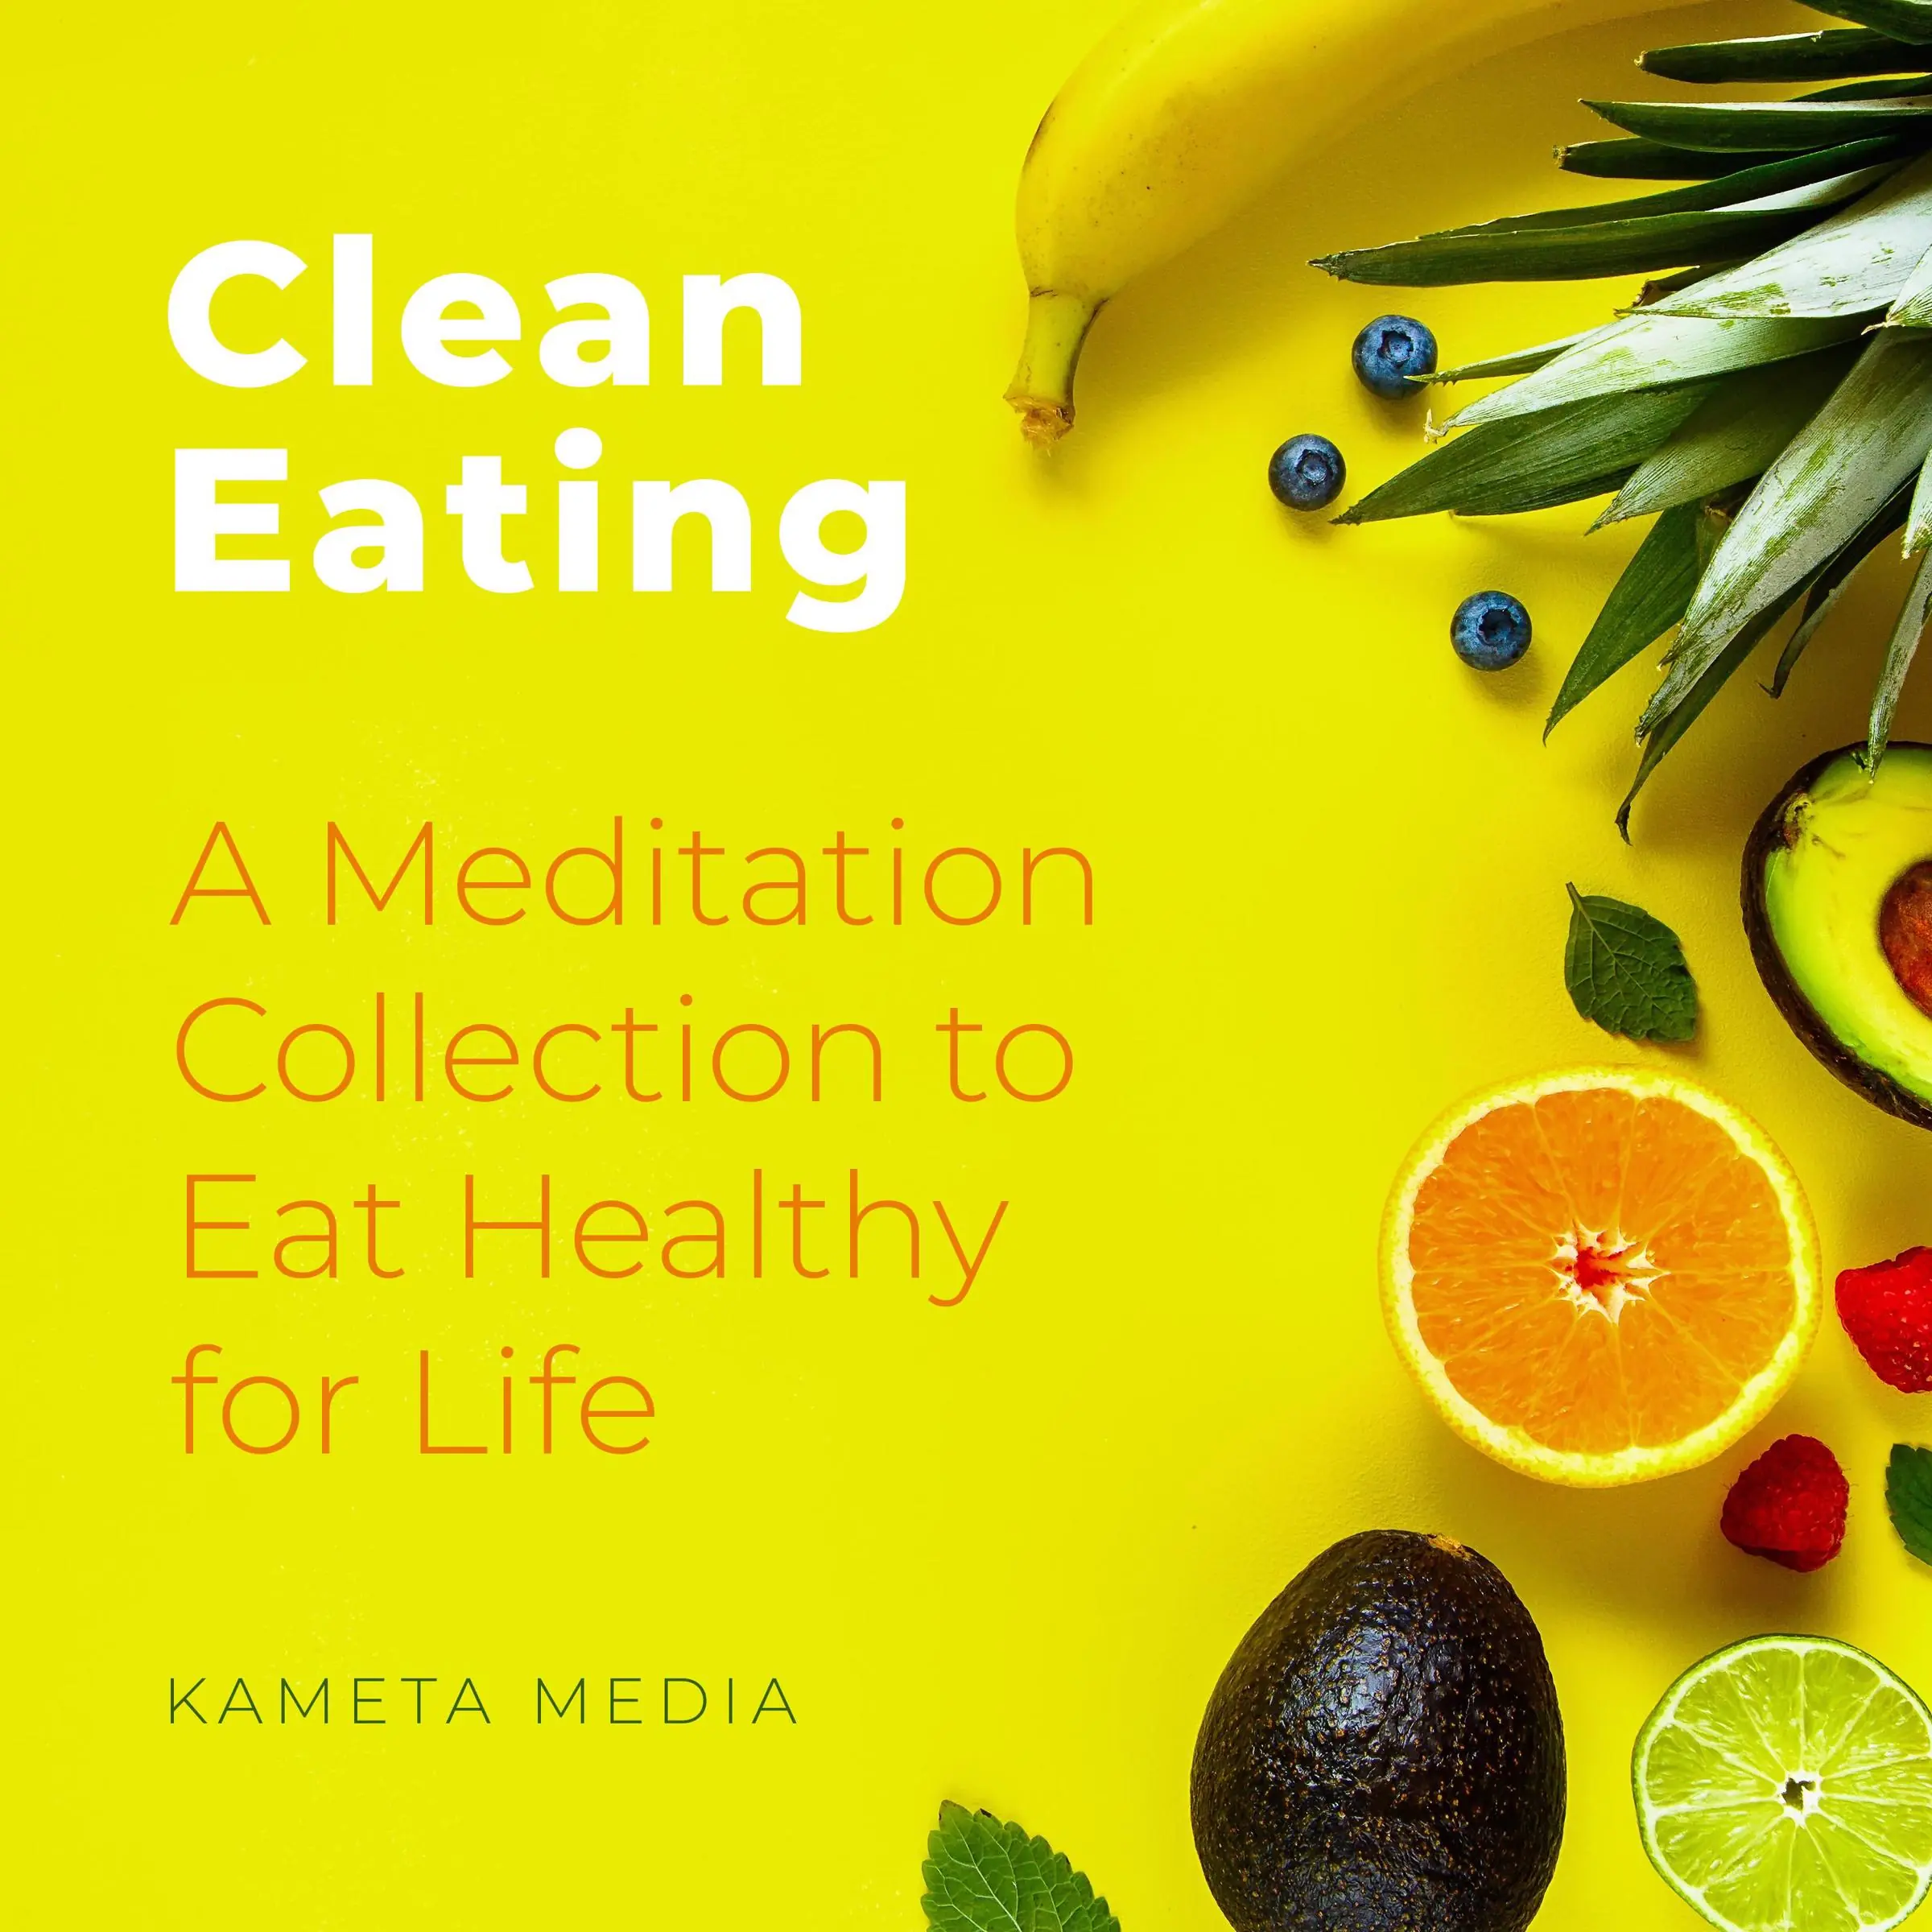 Clean Eating: A Meditation Collection to Eat Healthy for Life Audiobook by Kameta Media